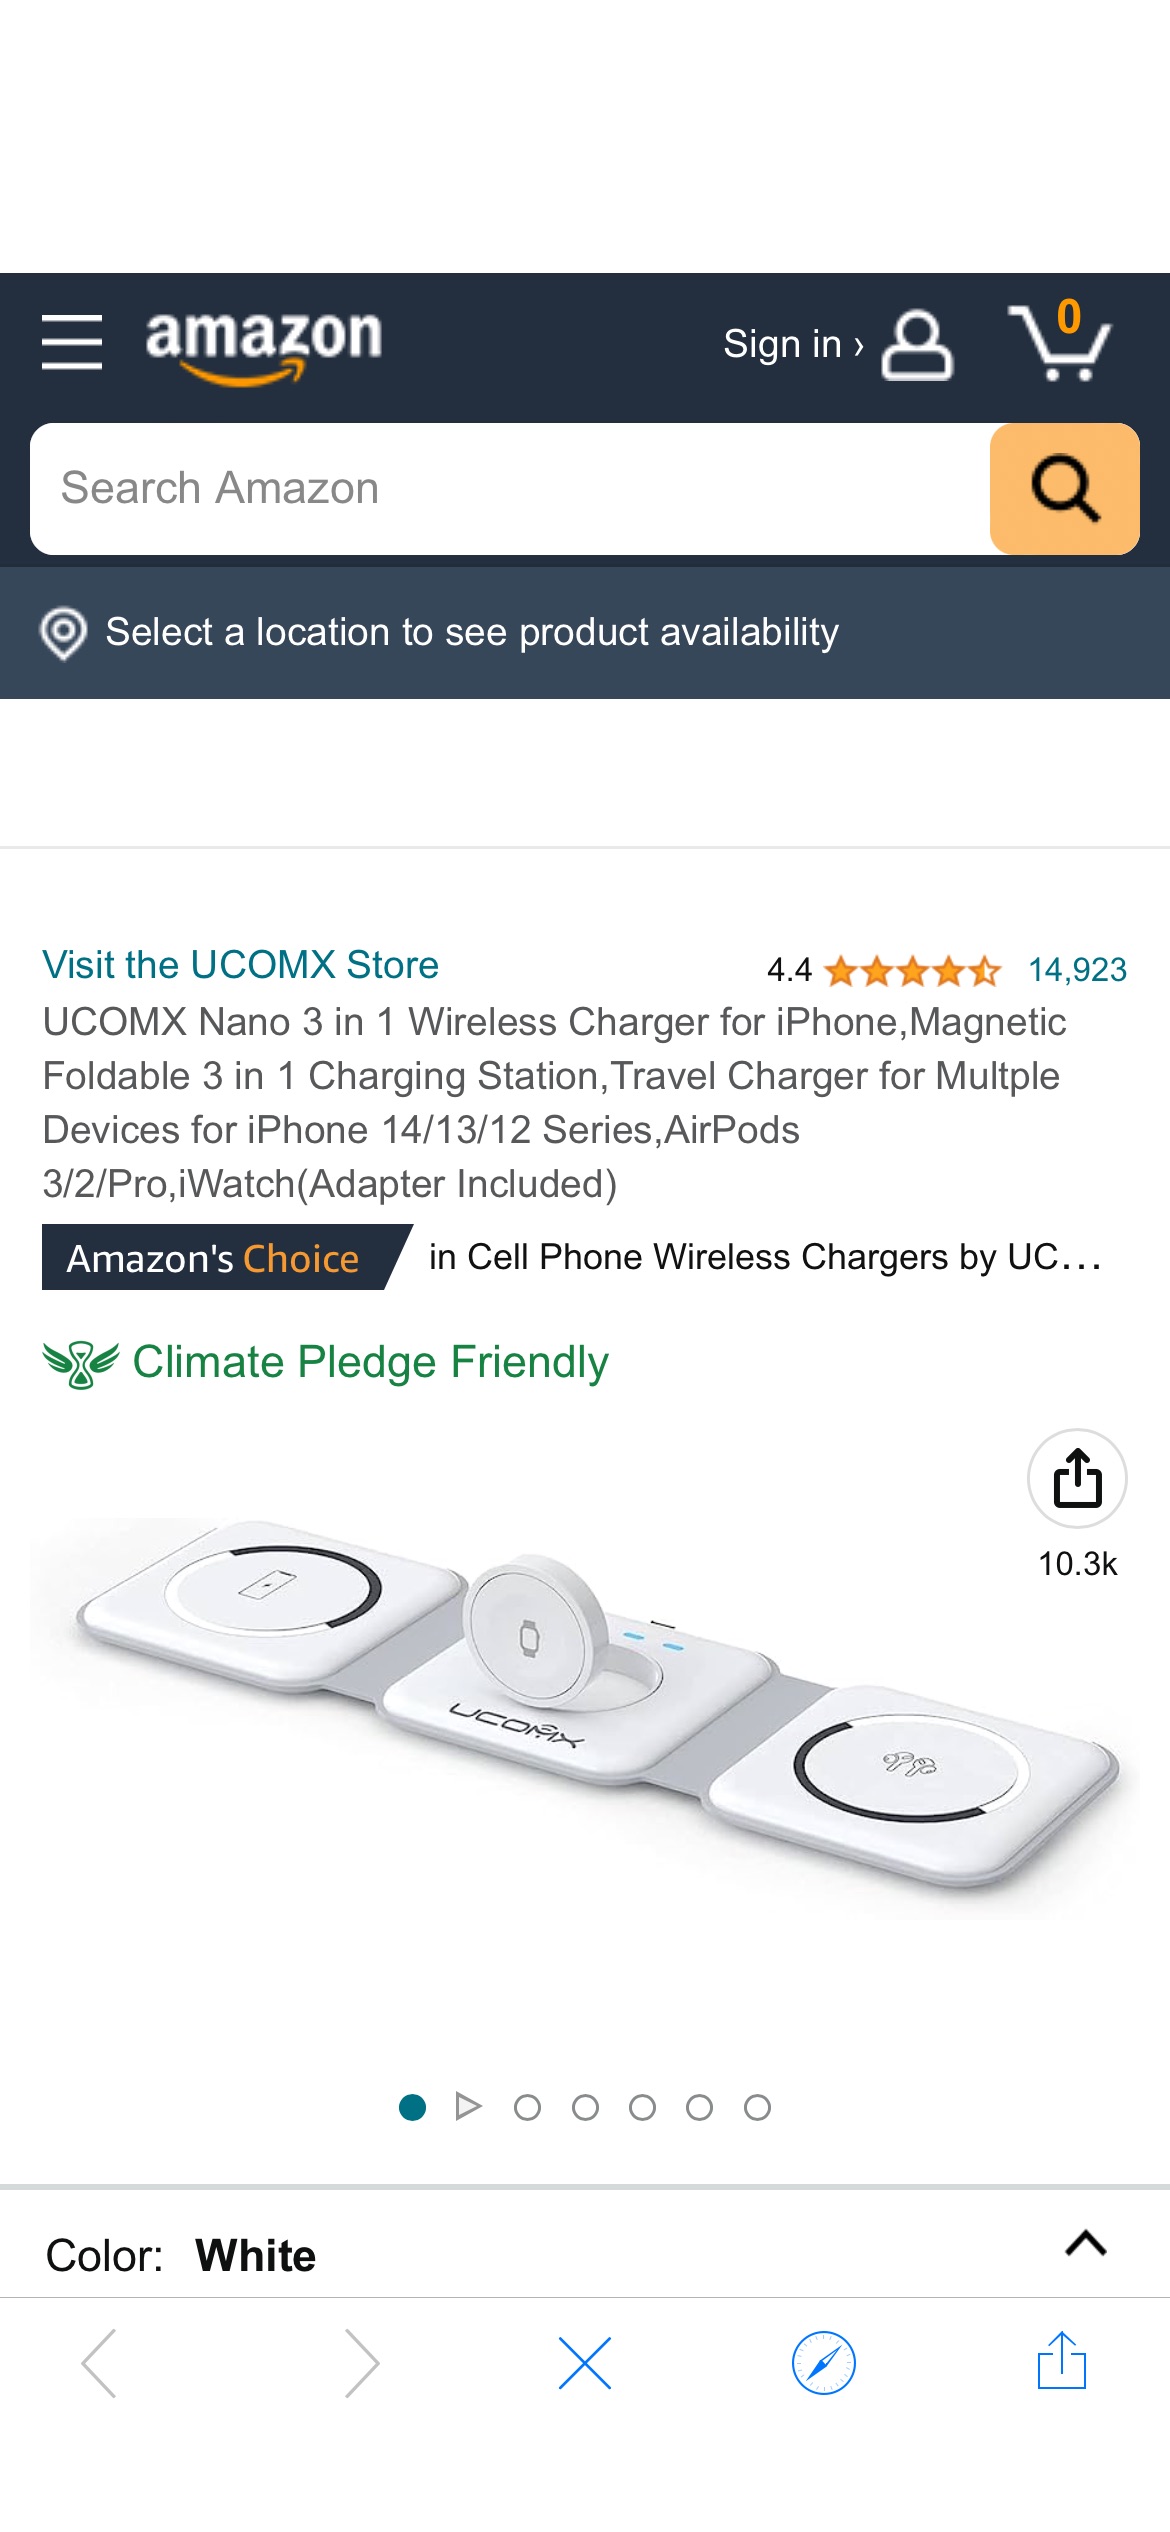 Amazon.com: UCOMX Nano 3 in 1 Wireless Charger for iPhone,Magnetic Foldable 3 in 1 Charging Station,Travel Charger for Multple Devices for iPhone 14/13/12 Series,AirPods 3/2/Pro,iWatch(Adapter Included) : Cell Phones & Accessories